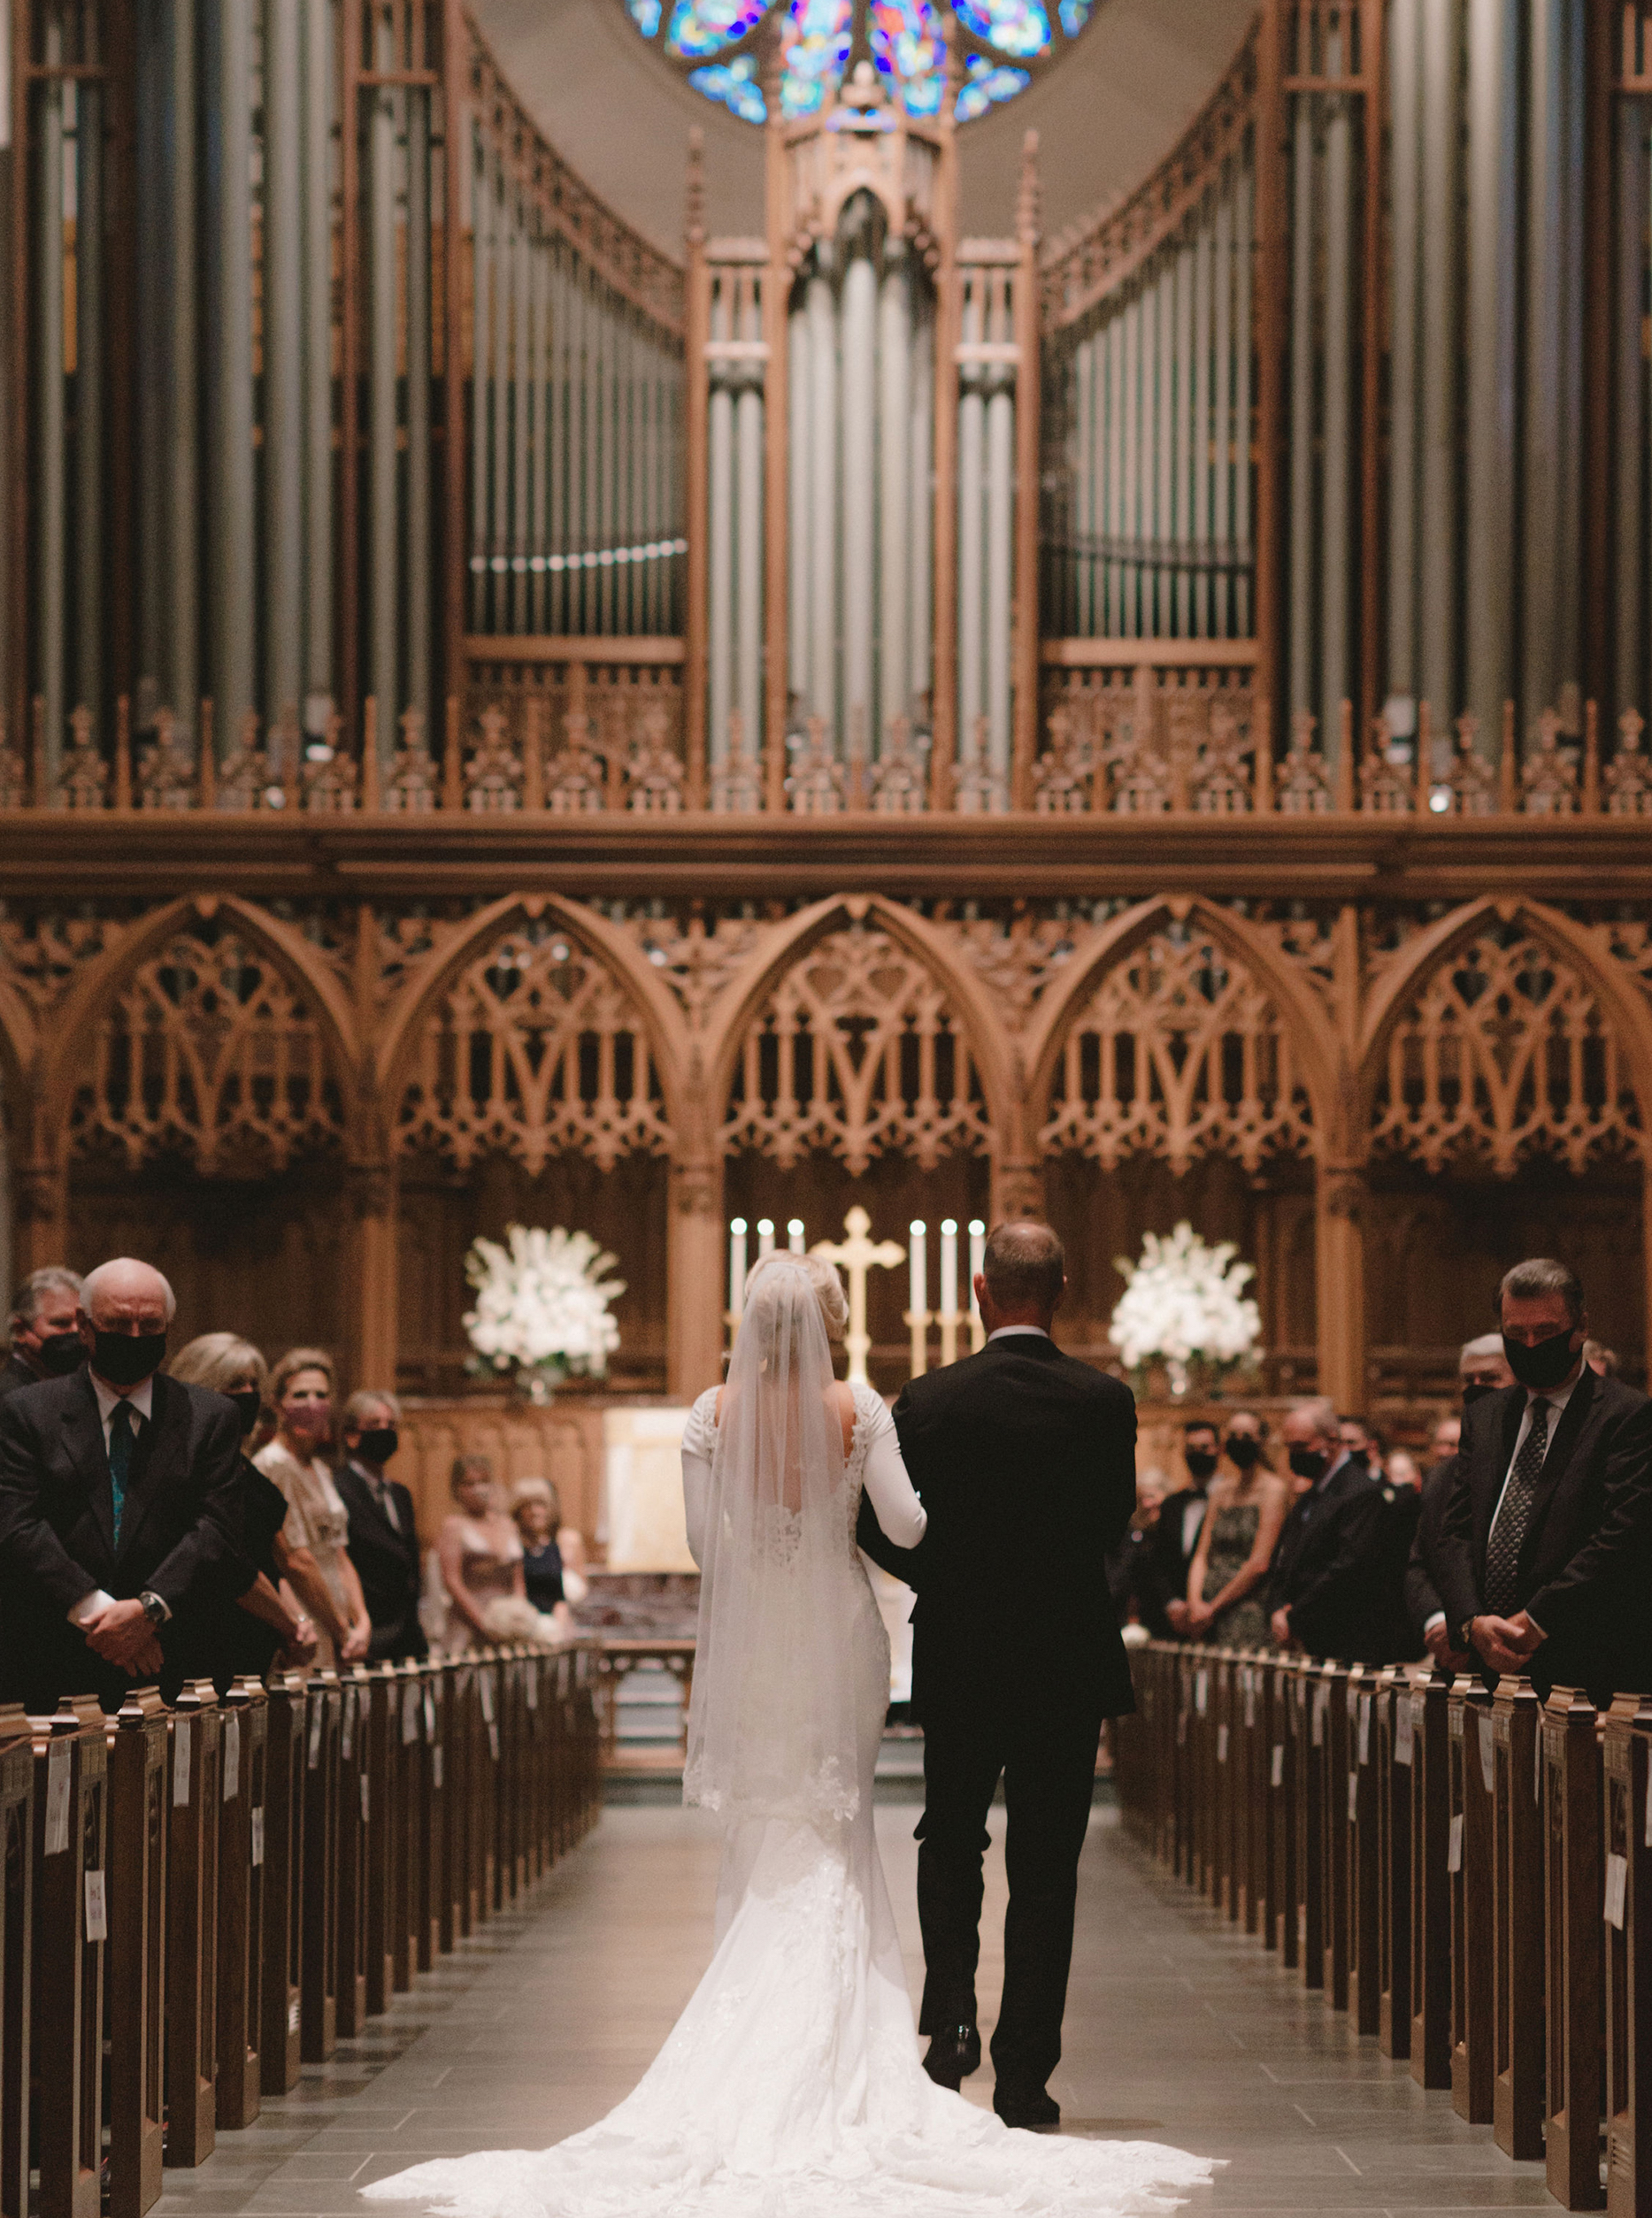 A bride walks down the aisle of a cathedral in Houston with her father.